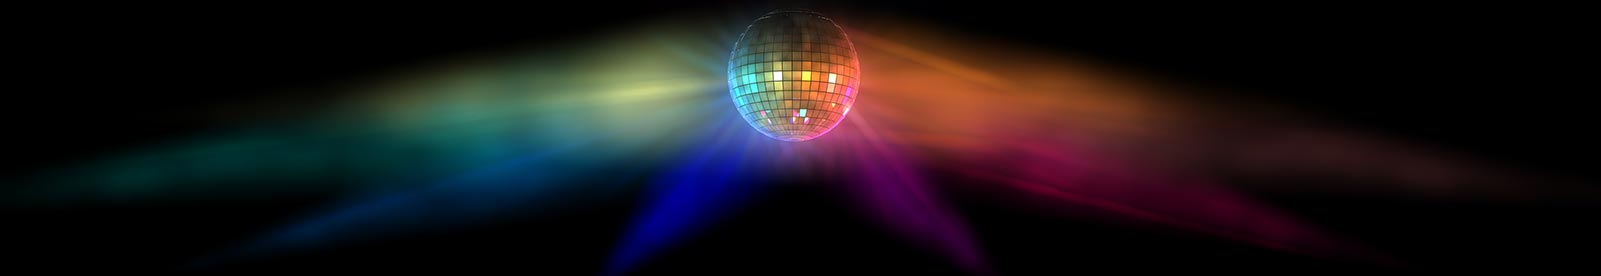 Disco Mirrorball Lighting Effects to Hire